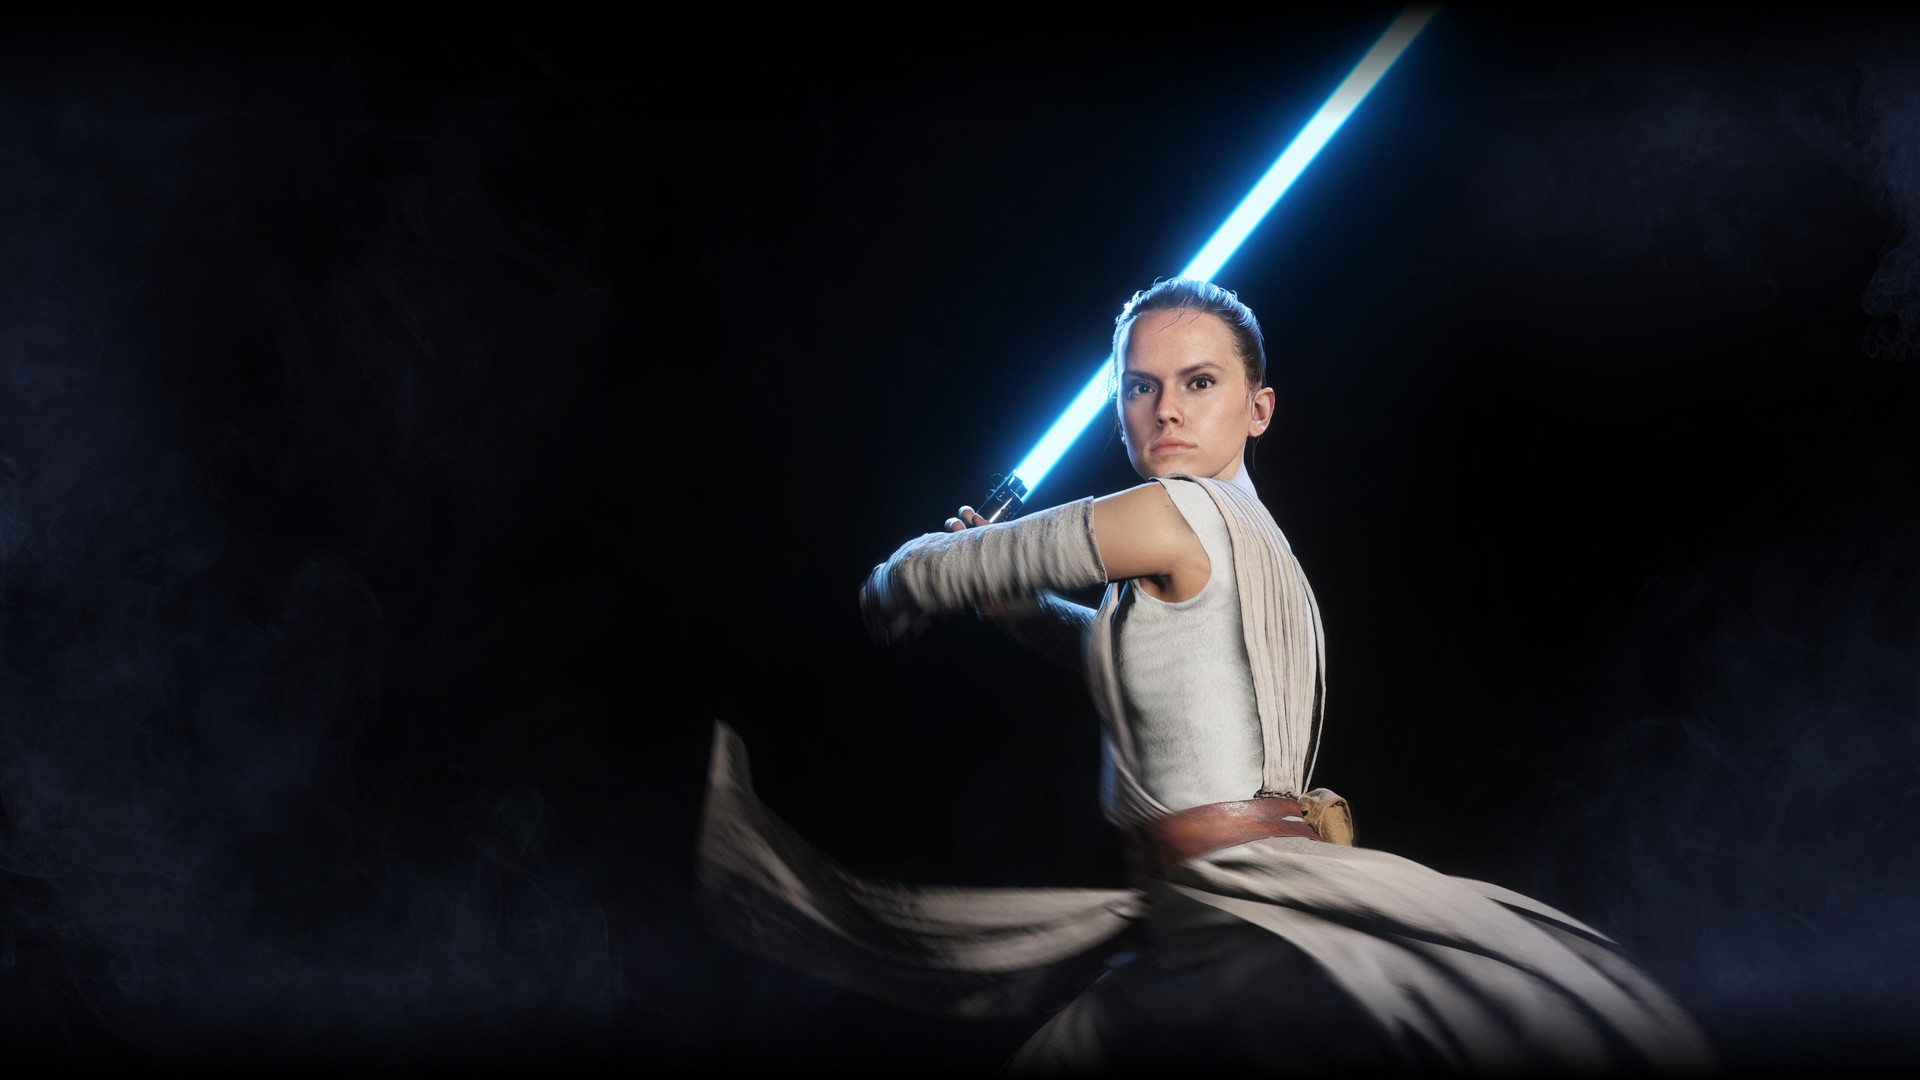 1920x1080 Rey with a lightsaber Wallpaper from Star Wars: Battlefront II